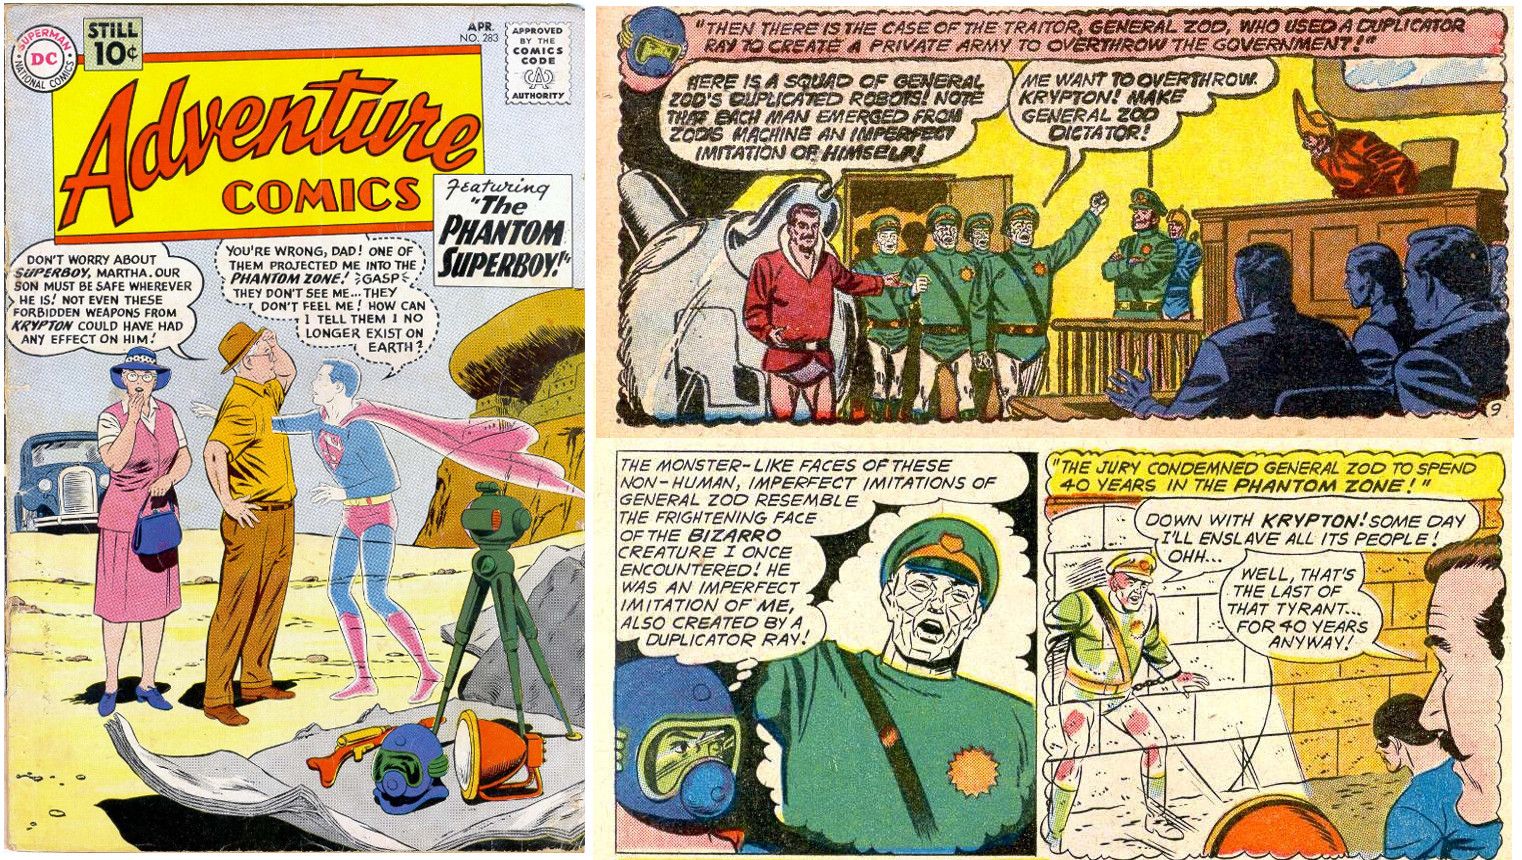 Adventure Comics #283 Zod's first appearance